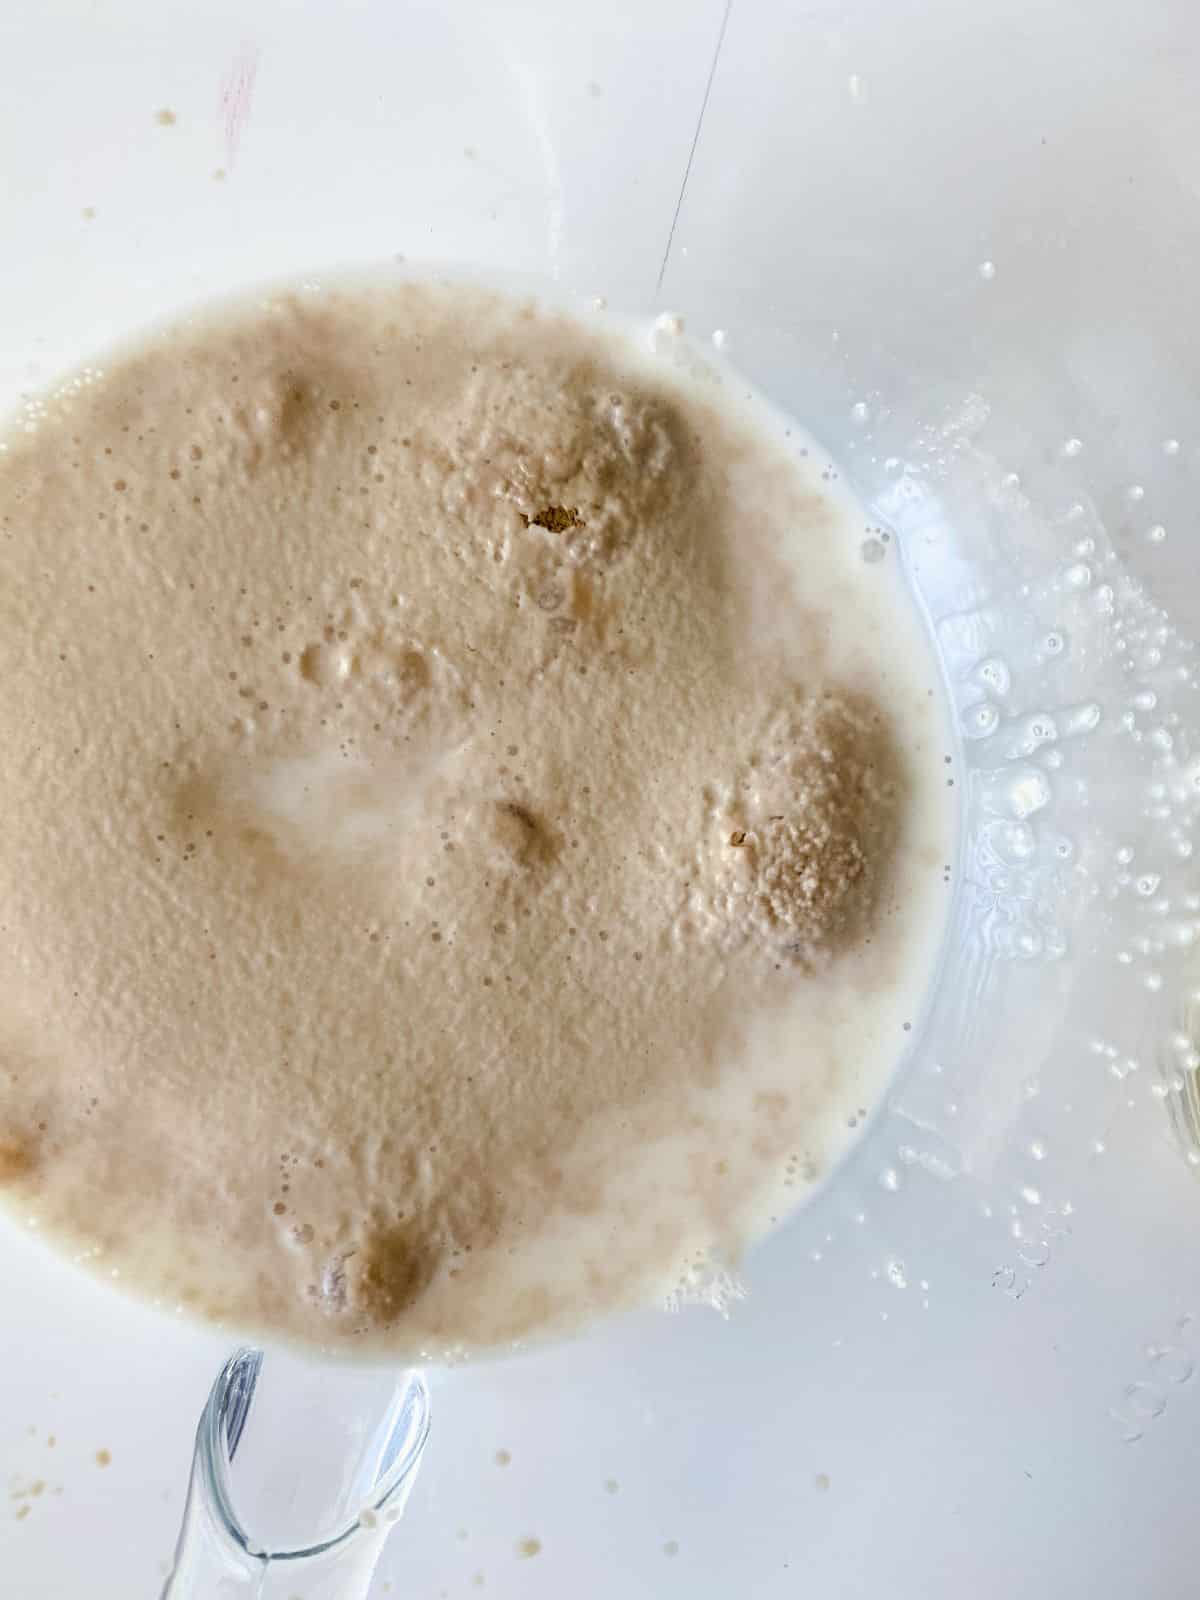 yeast and milk in bowl